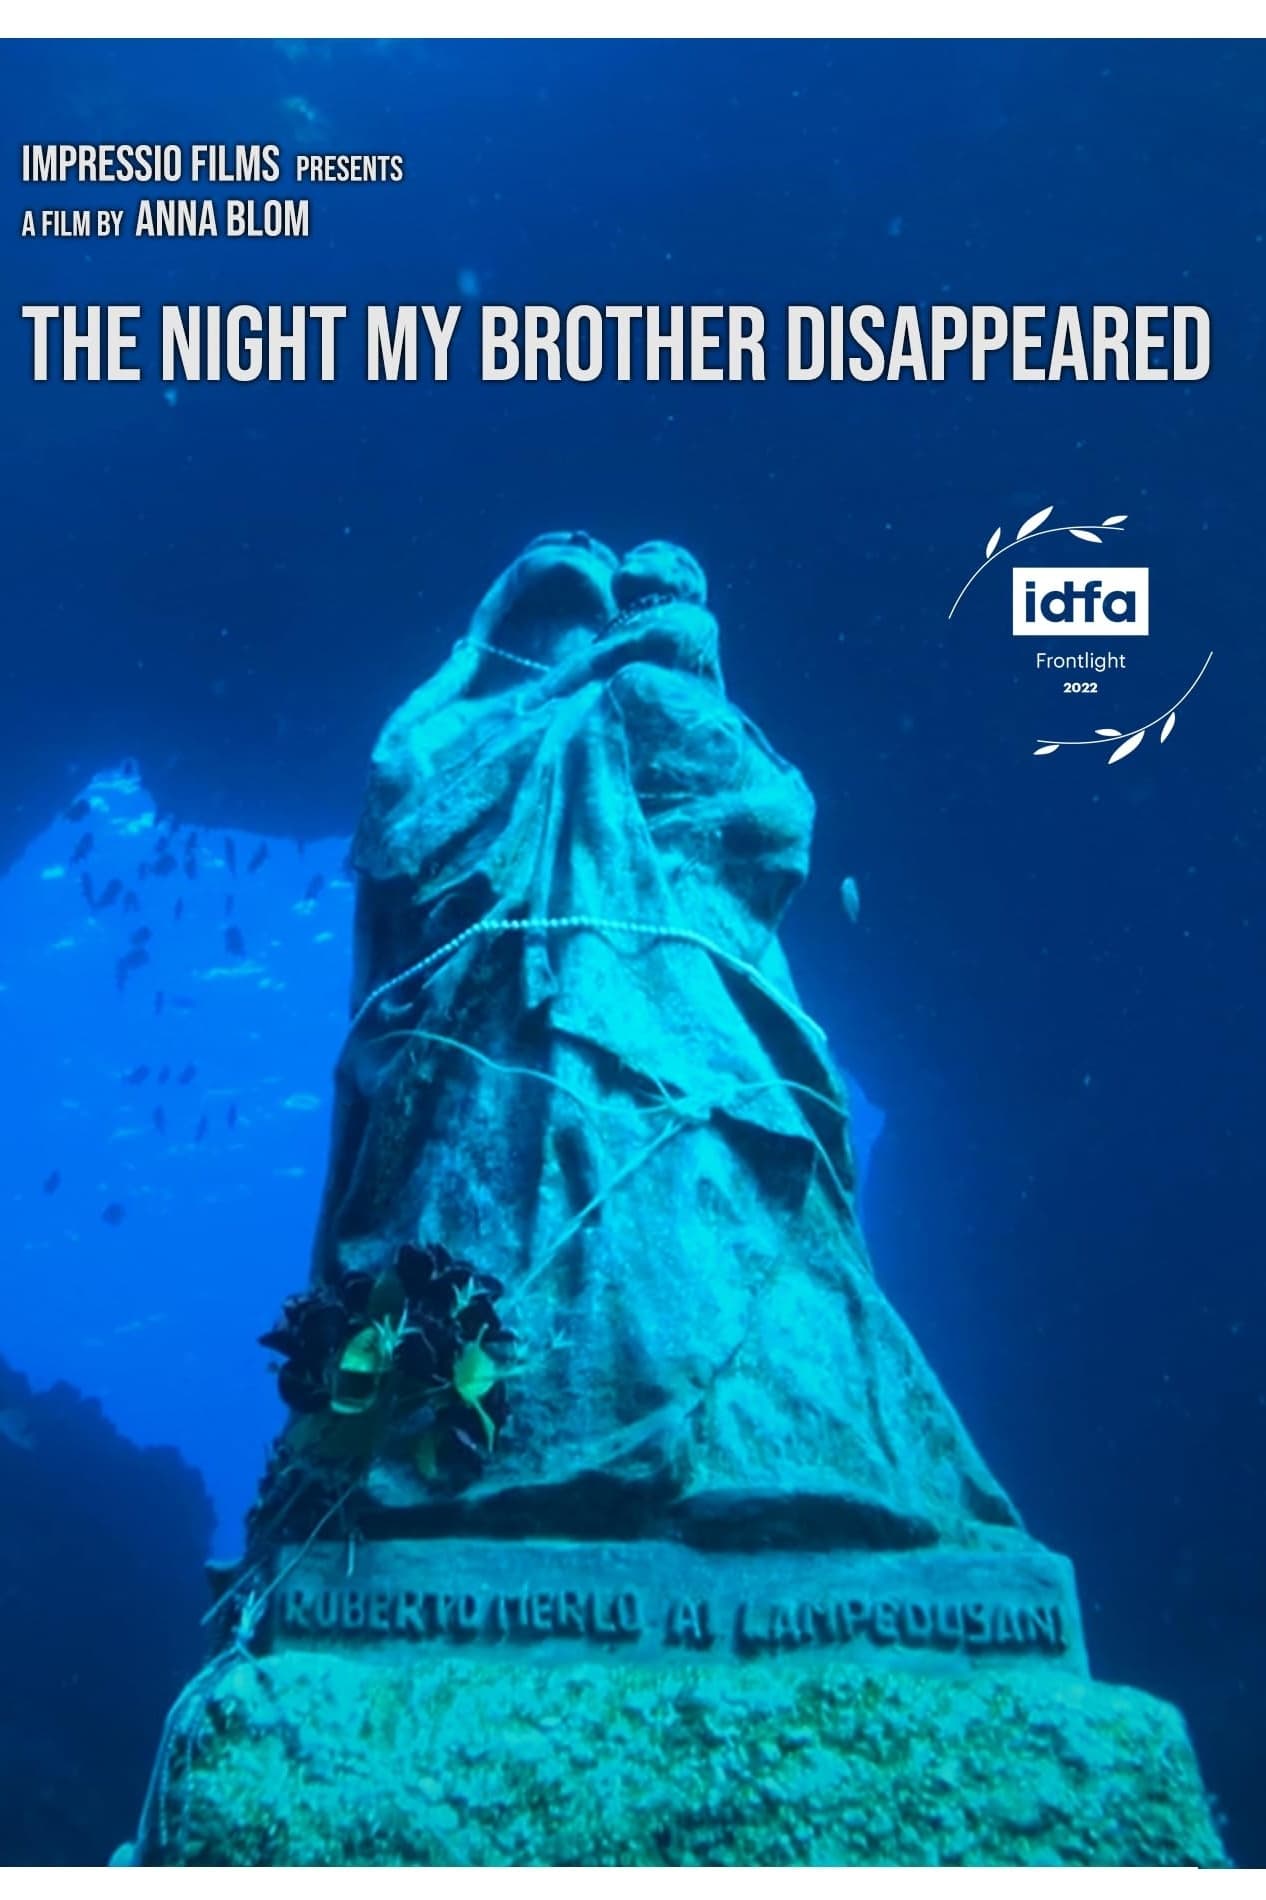 The Night My Brother Disappeared